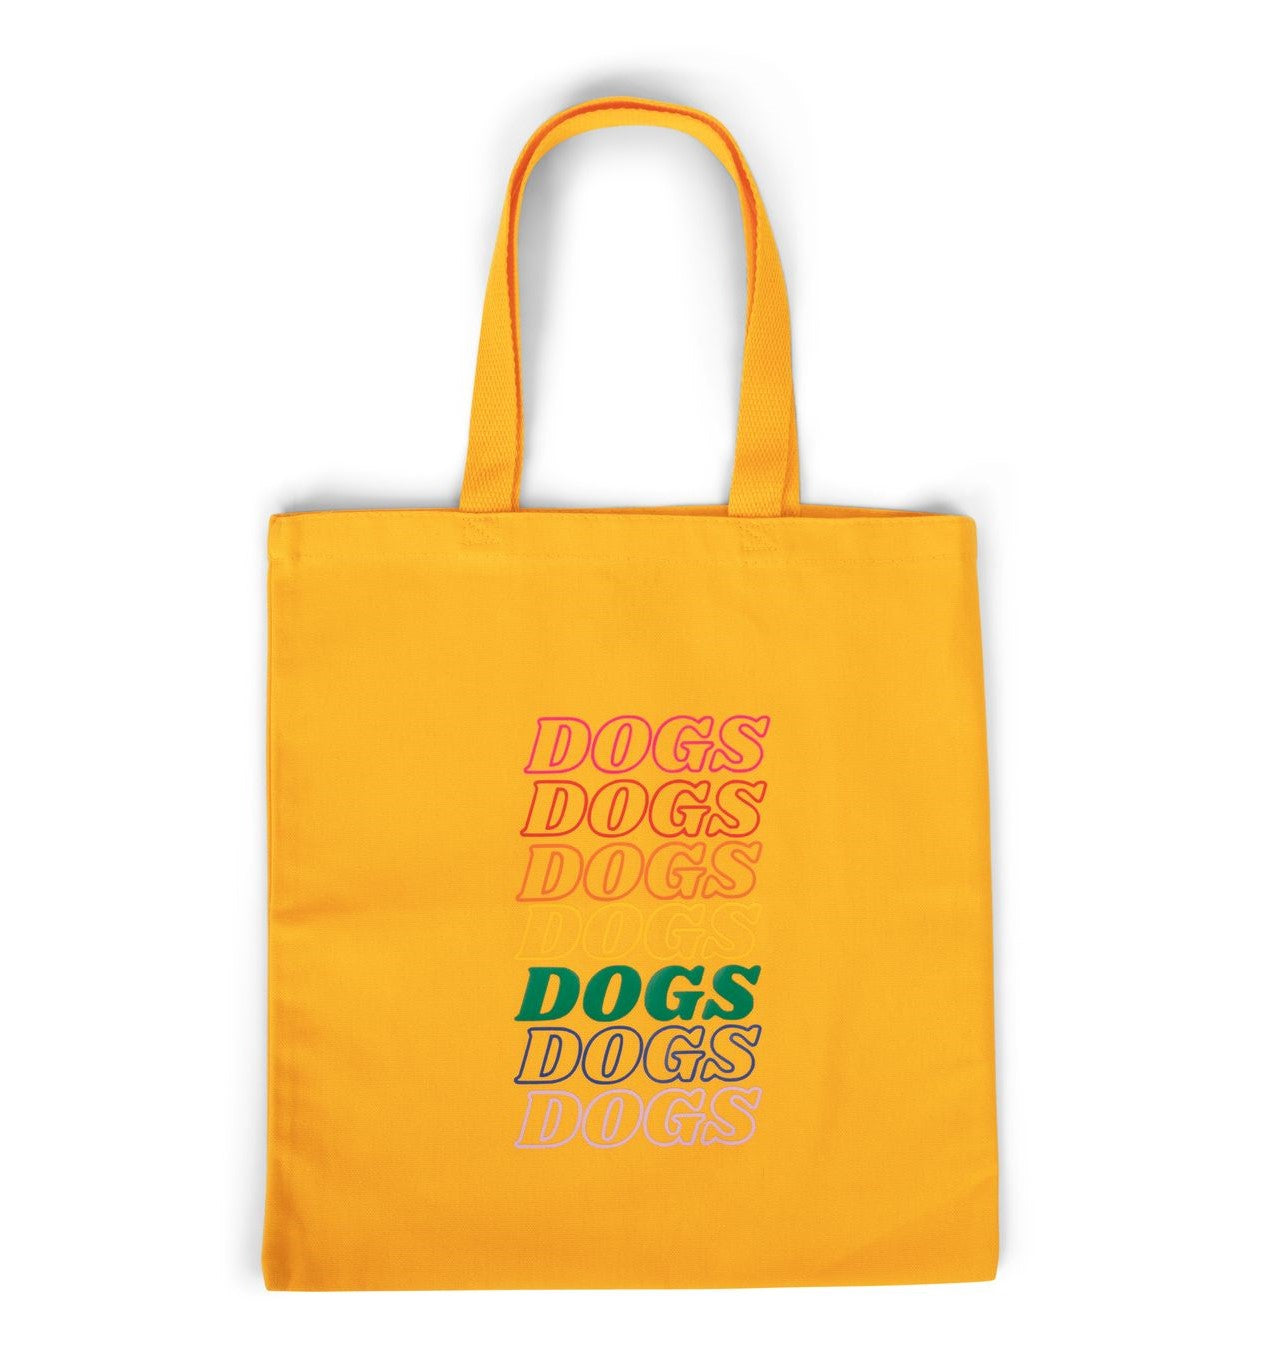 DOGS, DOGS, DOGS TOTE